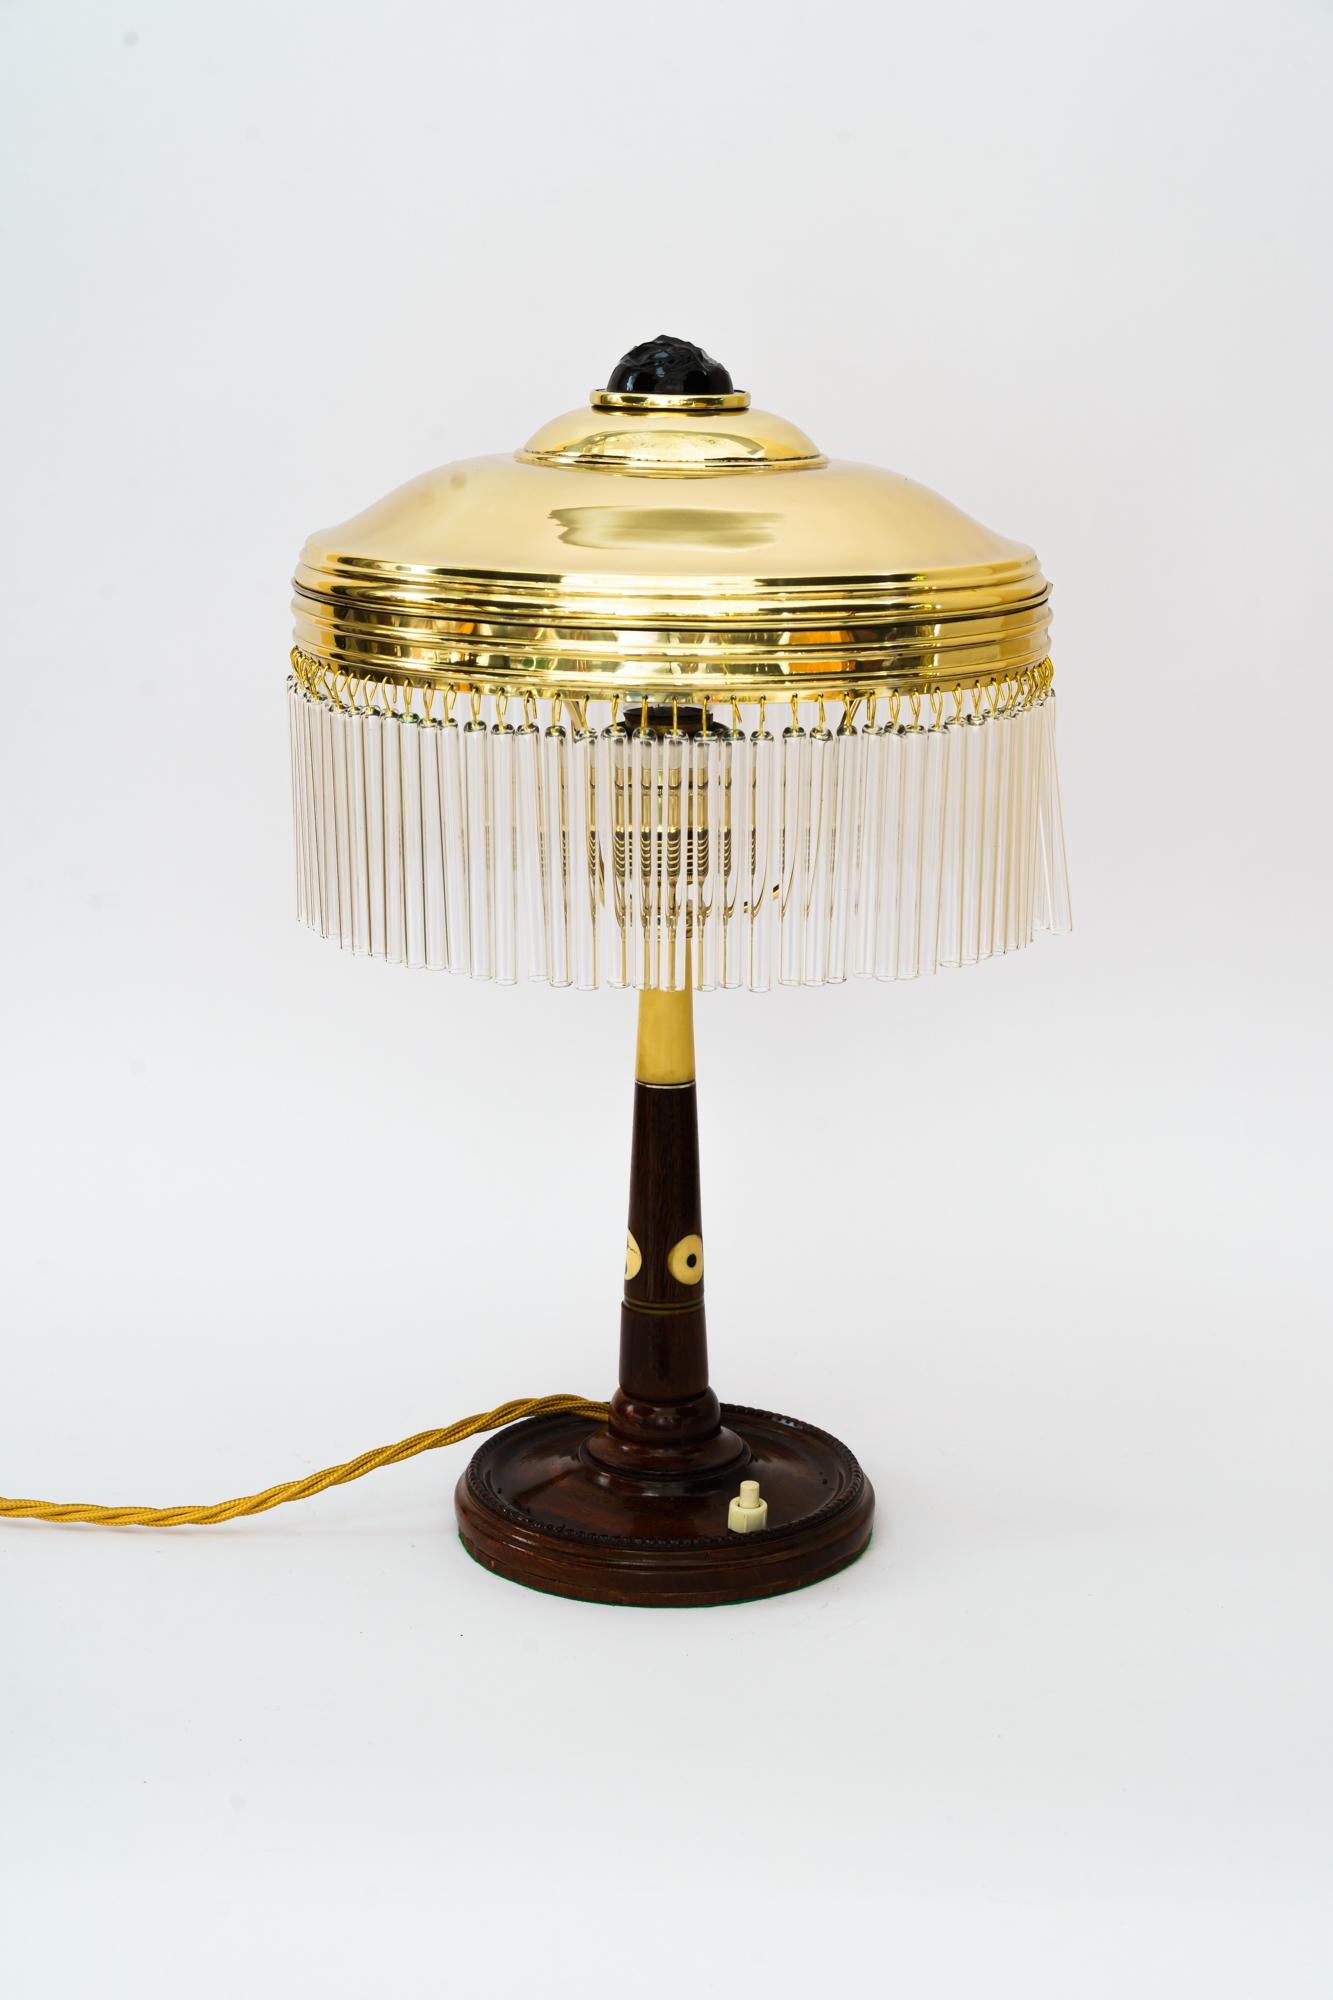 Rare Art Deco table lamp with glass sticks, Vienna, around 1920s.
Wood polished.
Brass polished and stove enameled.
The glass sticks are replaced (new).
 